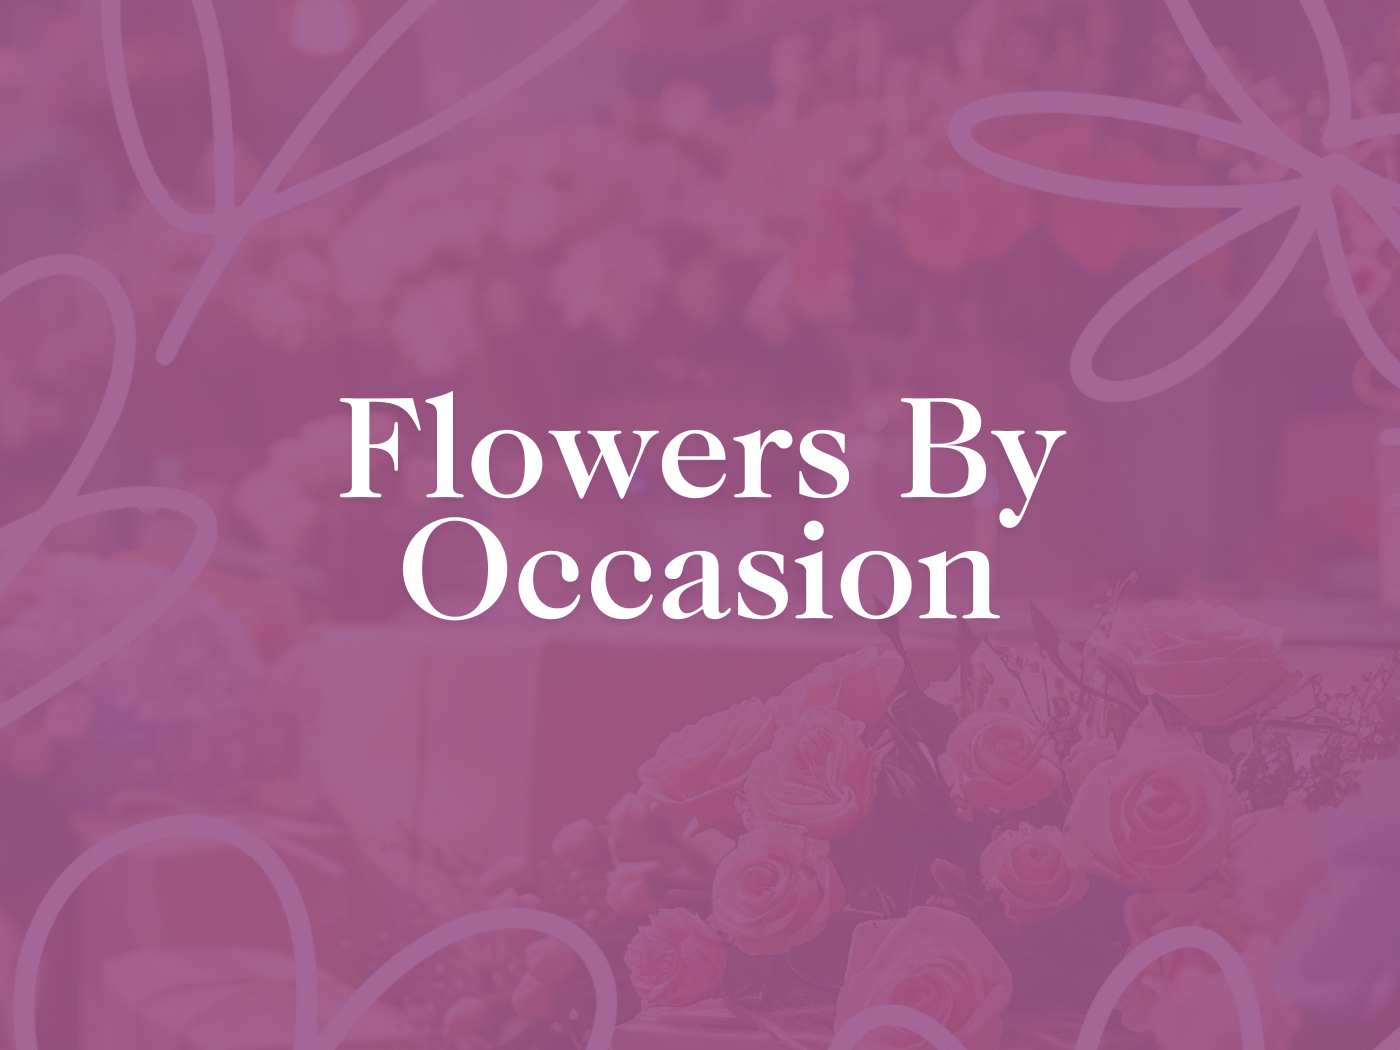 Promotional graphic for the Flowers By Occasion Collection featuring a soft pink background overlaid with decorative floral patterns and the text 'Flowers By Occasion' in elegant white font. Fabulous Flowers and Gifts.